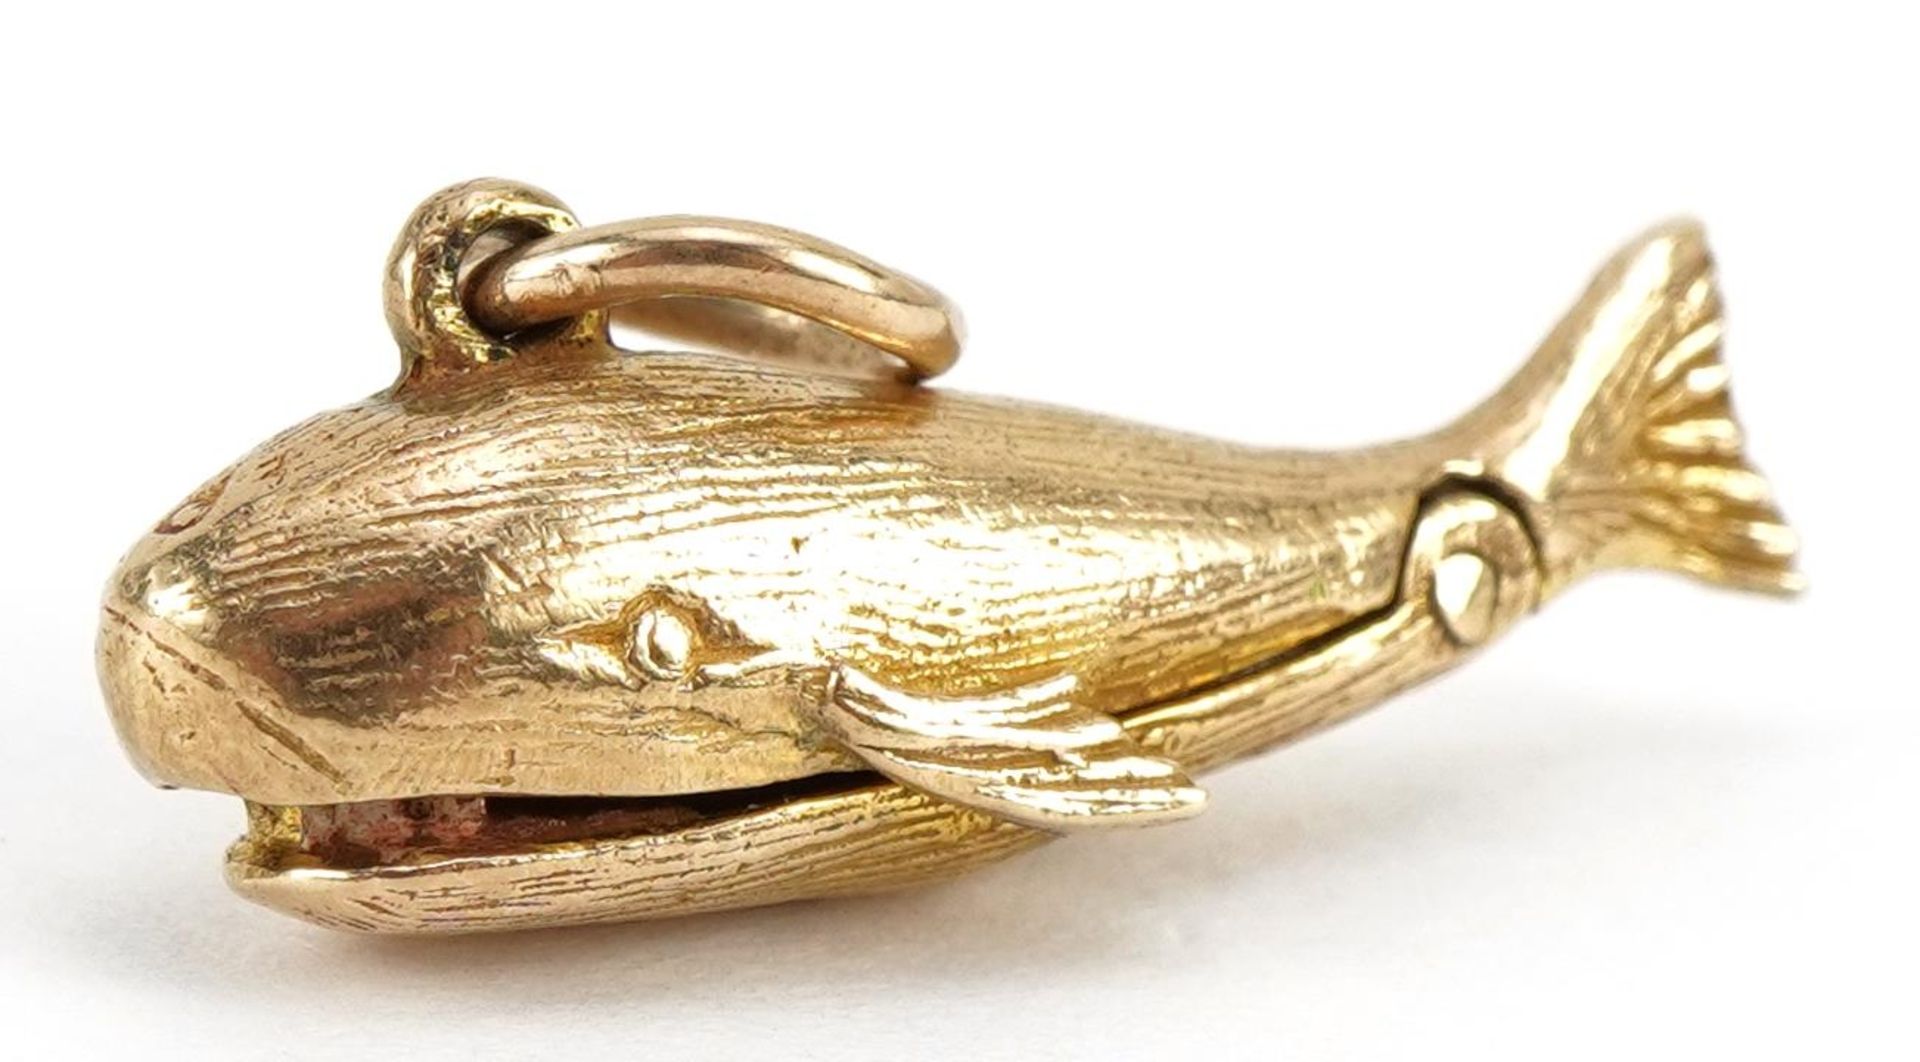 9ct gold whale charm with hinged mouth opening to reveal an enamelled figure, 2.3cm wide, 2.7g